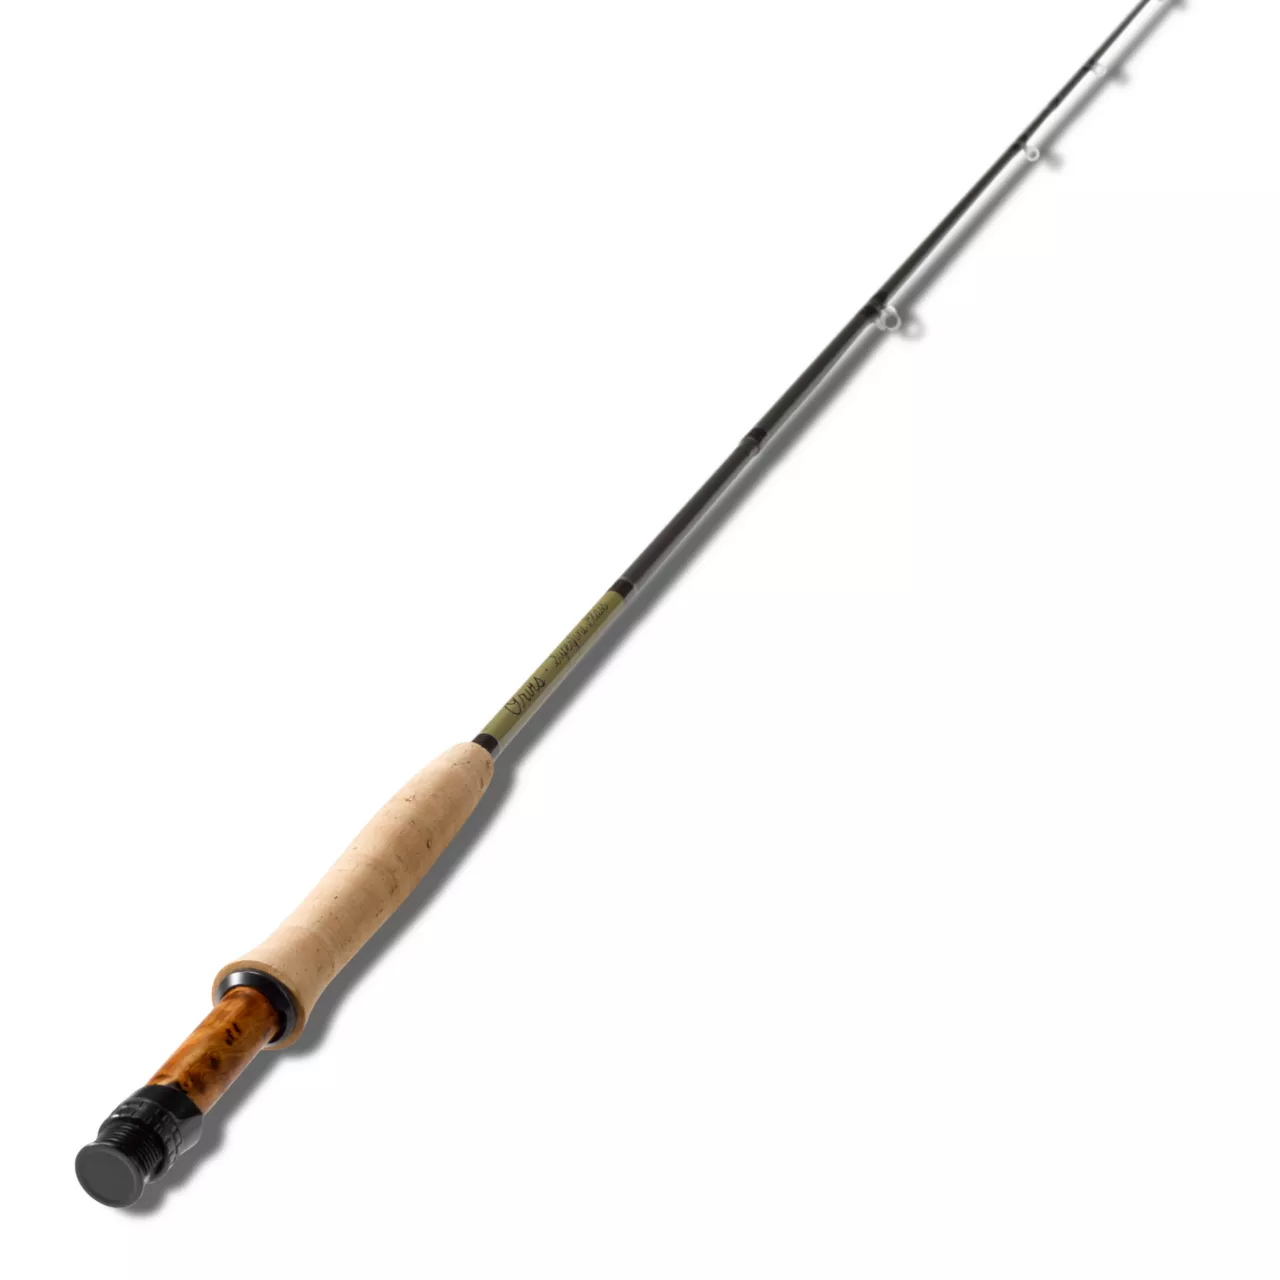 Superfine Glass 2-weight 6'6" Fly Rod